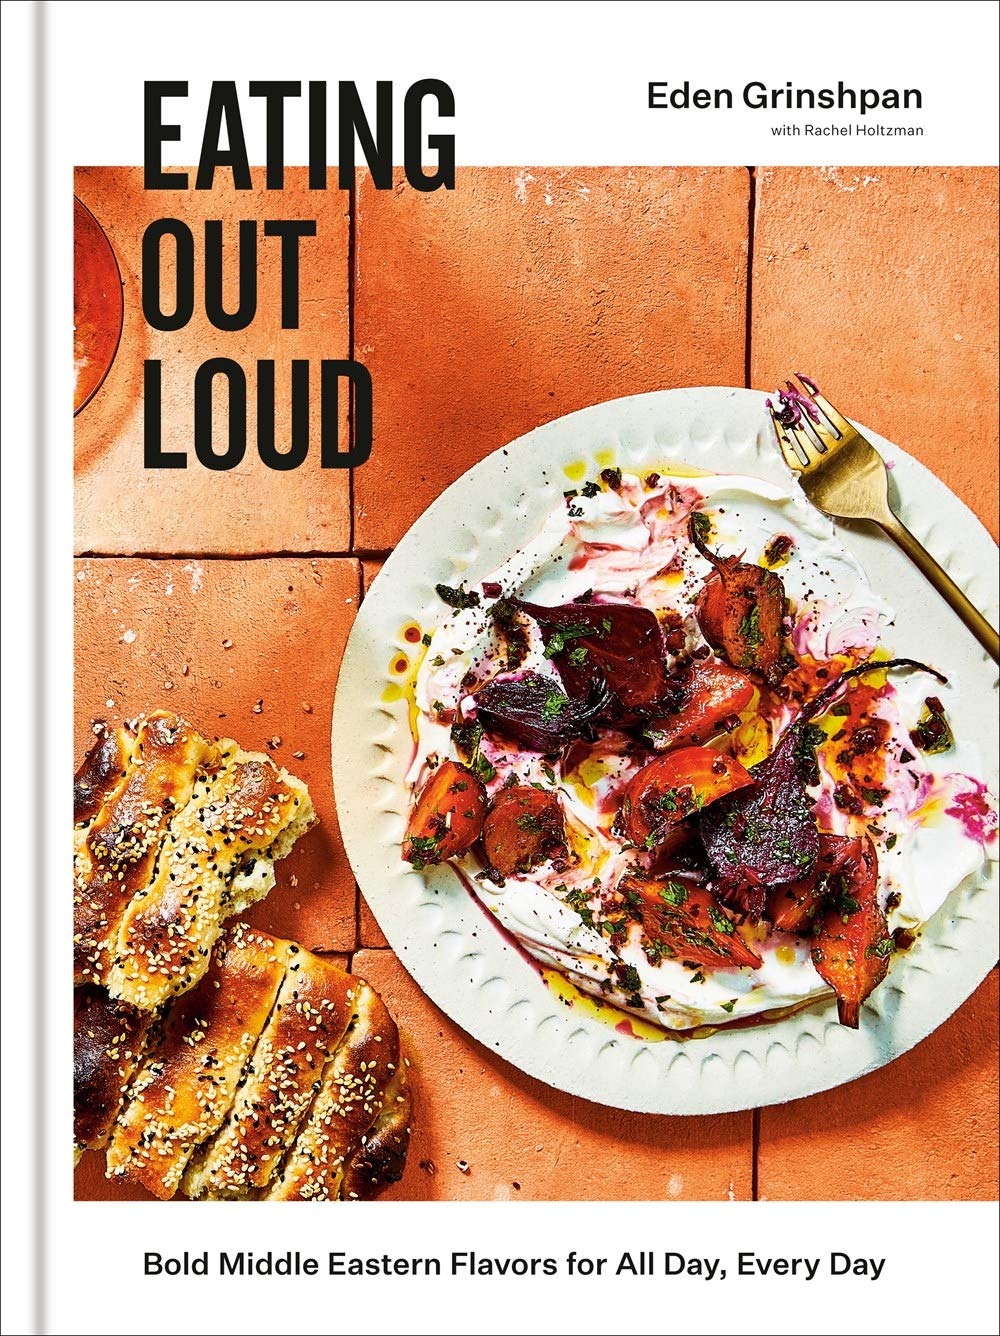 Eating Out Loud: Bold Middle Eastern Flavors for All Day, Every Day (Eden Grinshpan)